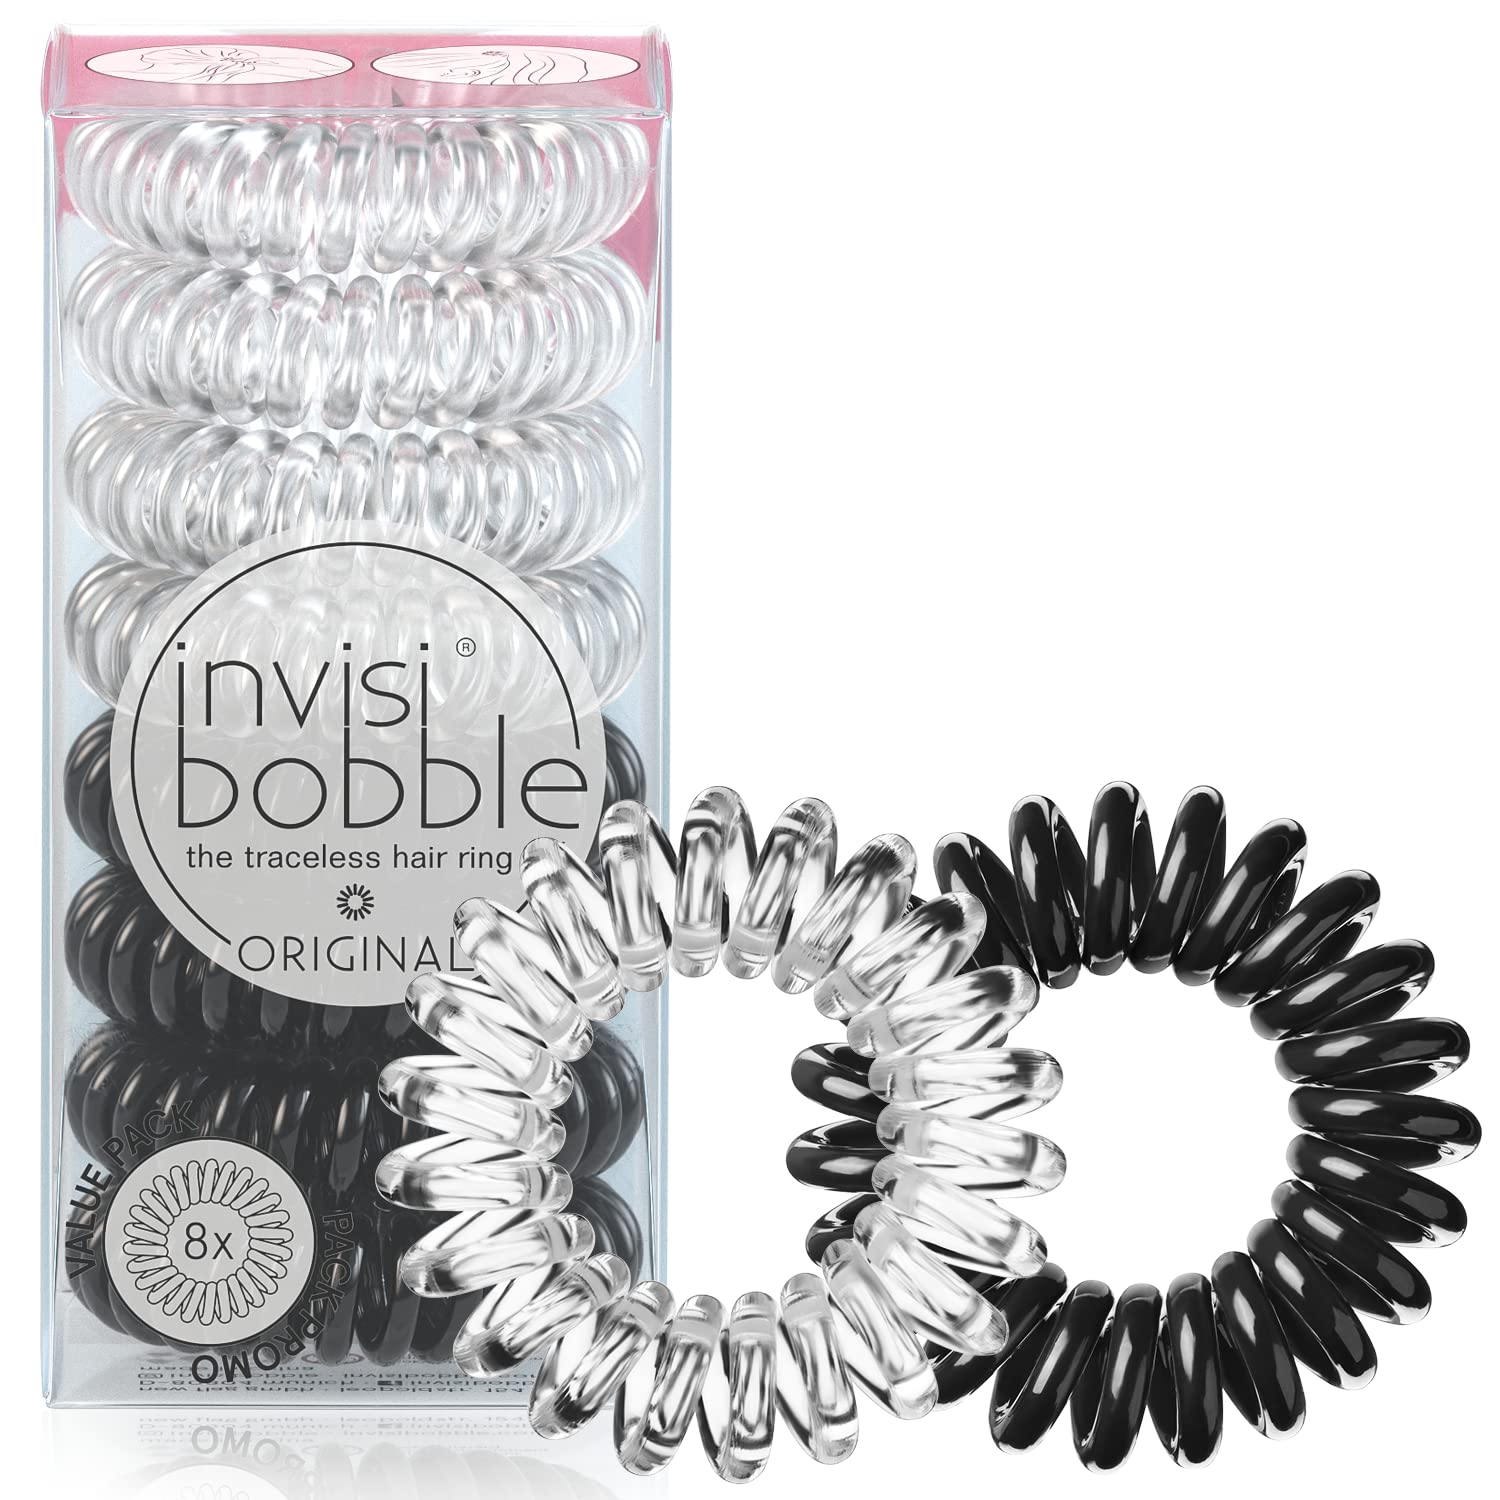 invisibobble Original Traceless Spiral Hair Ties - Pack of 8, Crystal Clear and True Black- Strong Elastic Grip Coil Accessories for Women - Non Soaking - Gentle for Girls Teens and Thick Hair